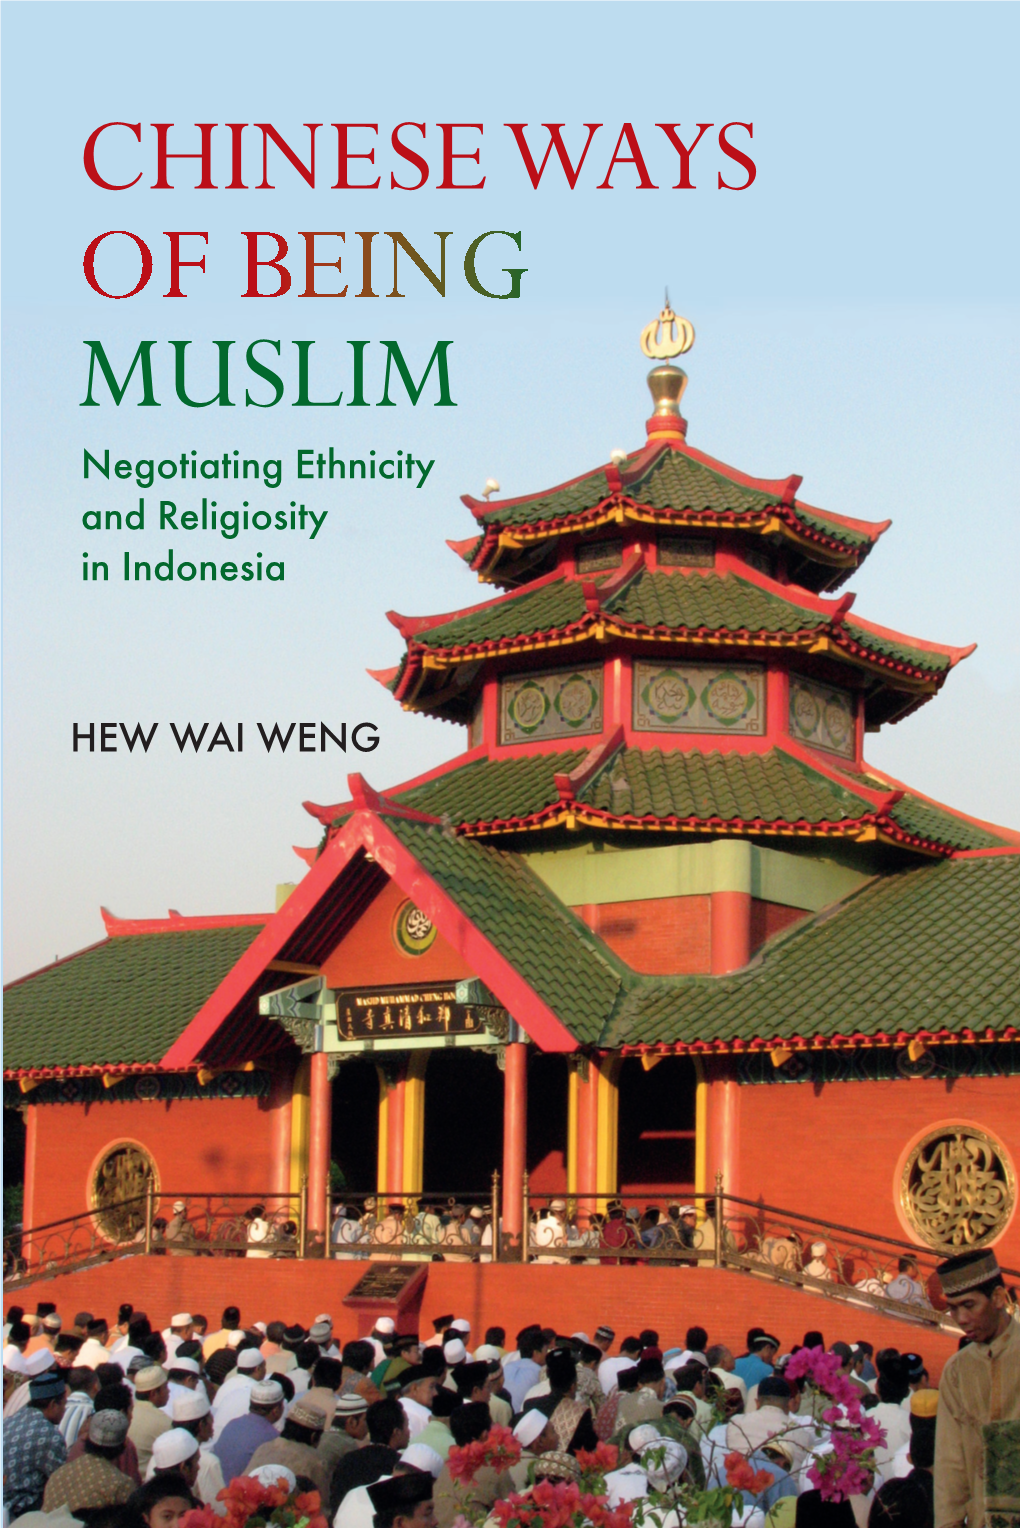 CHINESE WAYS of BEING MUSLIM Ple Ways of Being Or Not Being Chinese and Muslim